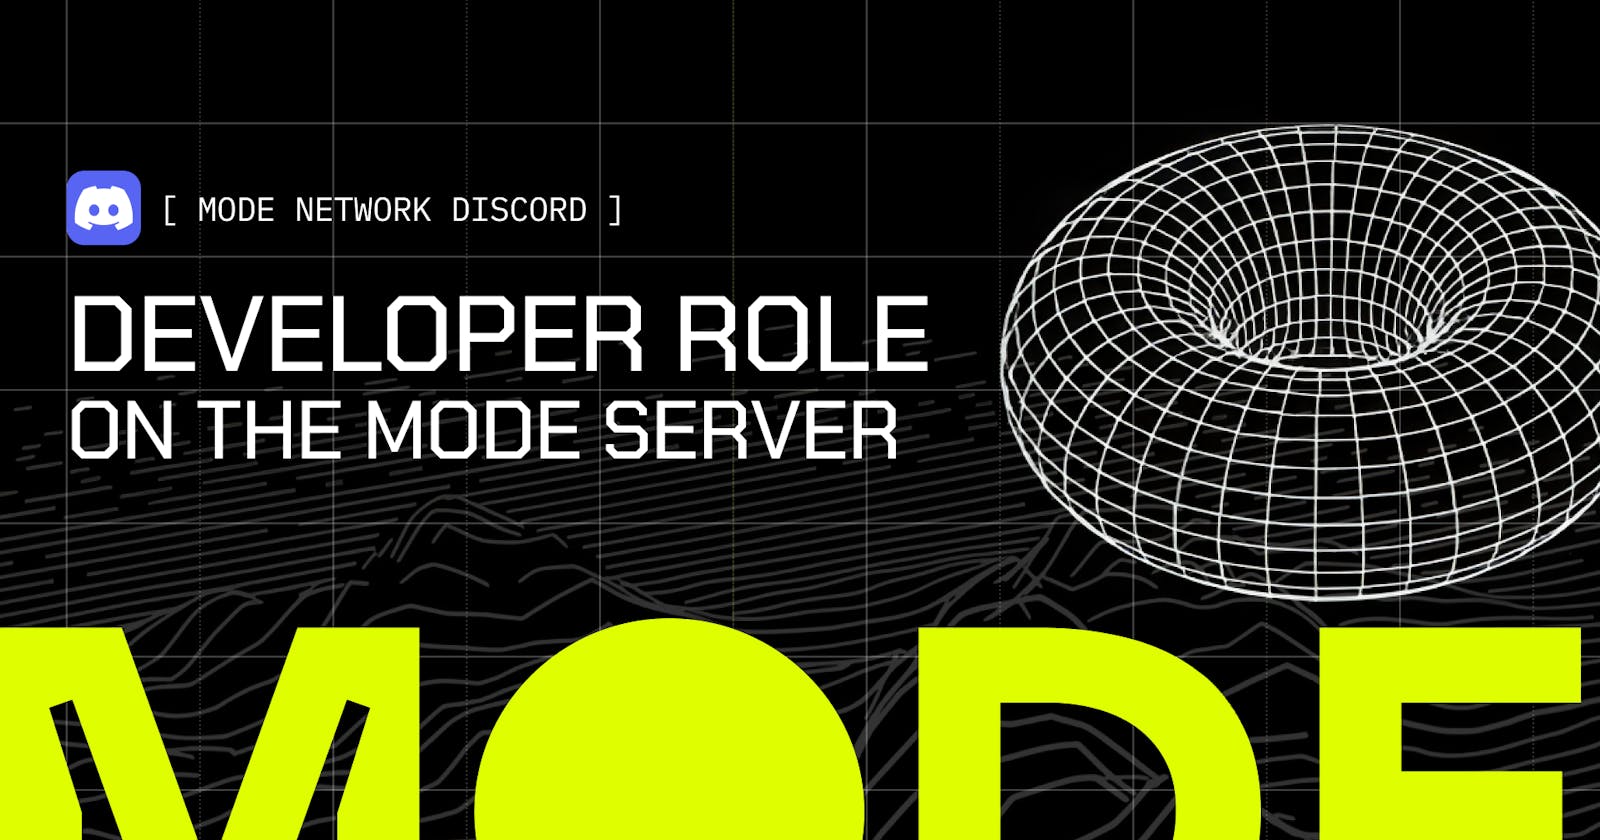 How to get the Developer Role on the Mode Discord Server